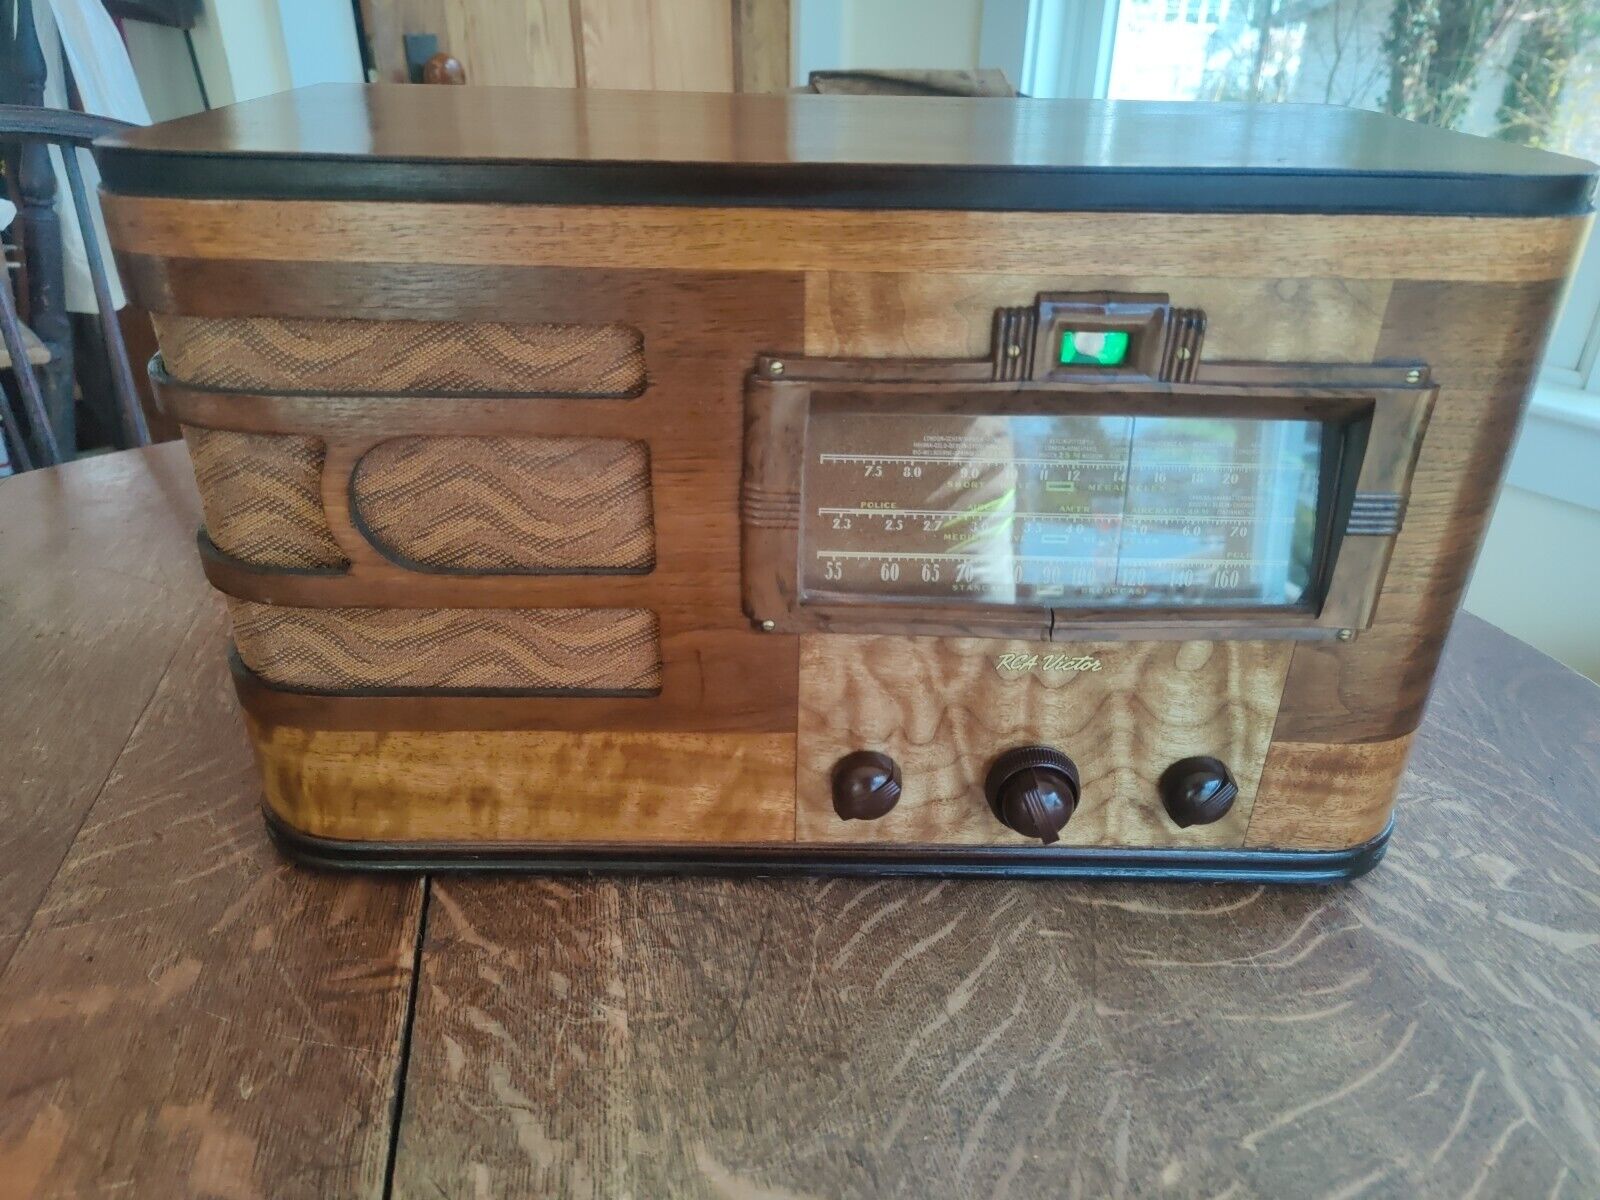 Desireable RCA Model 87T1  Radio - Exceptional Condition Restored Working 